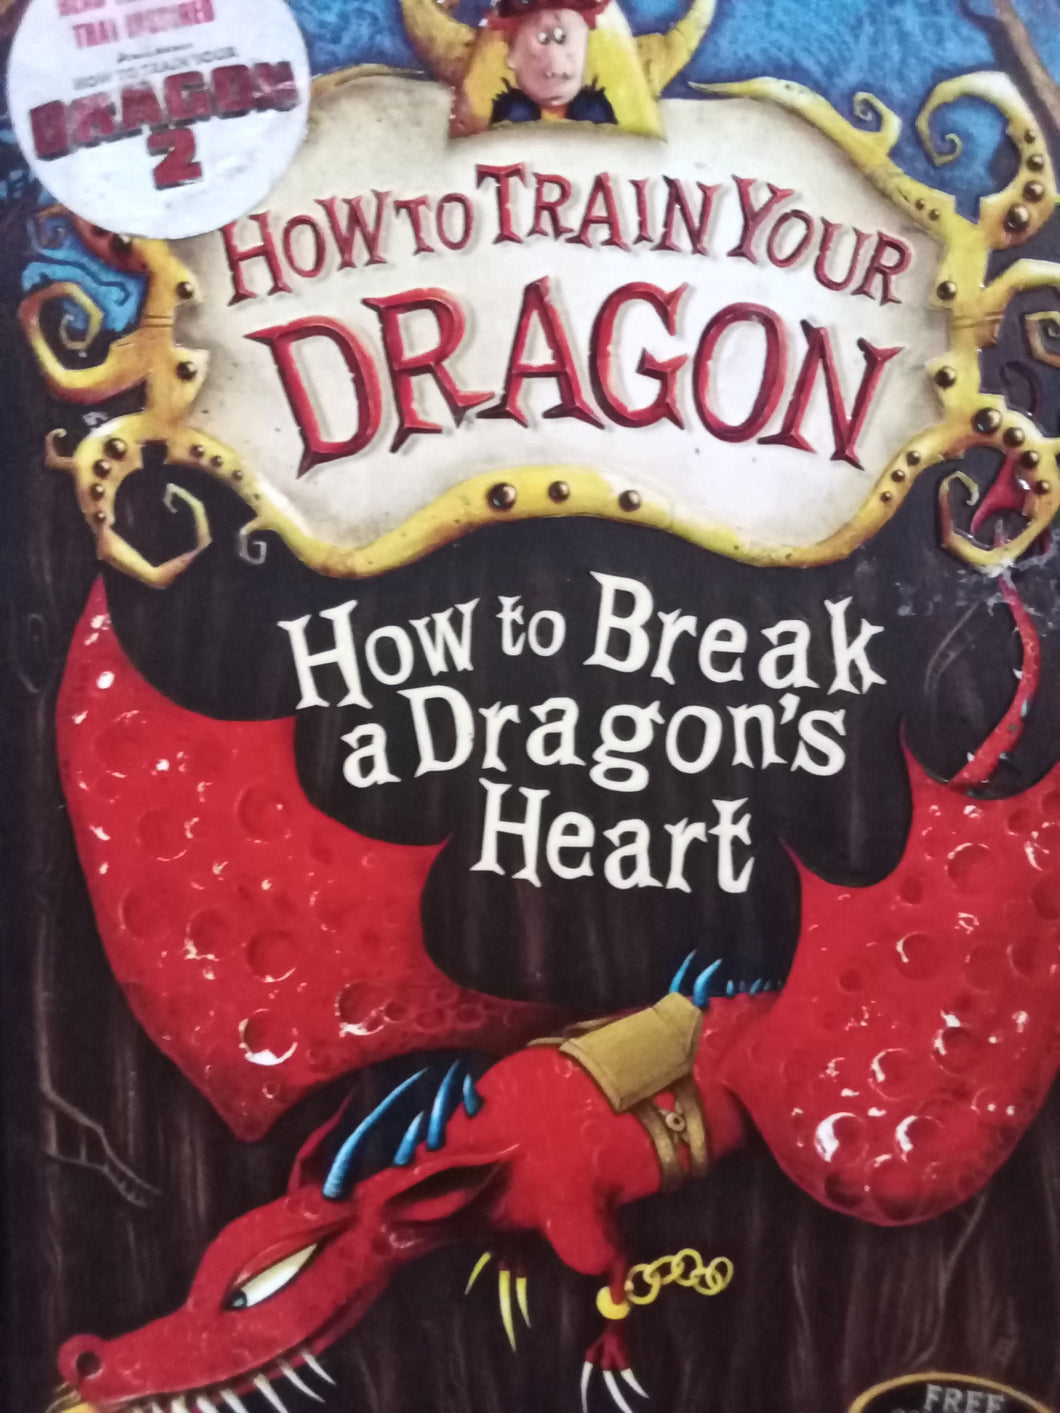 How To Train You Dragon: How To Break A Dragon's Heart by Cressida Cowell